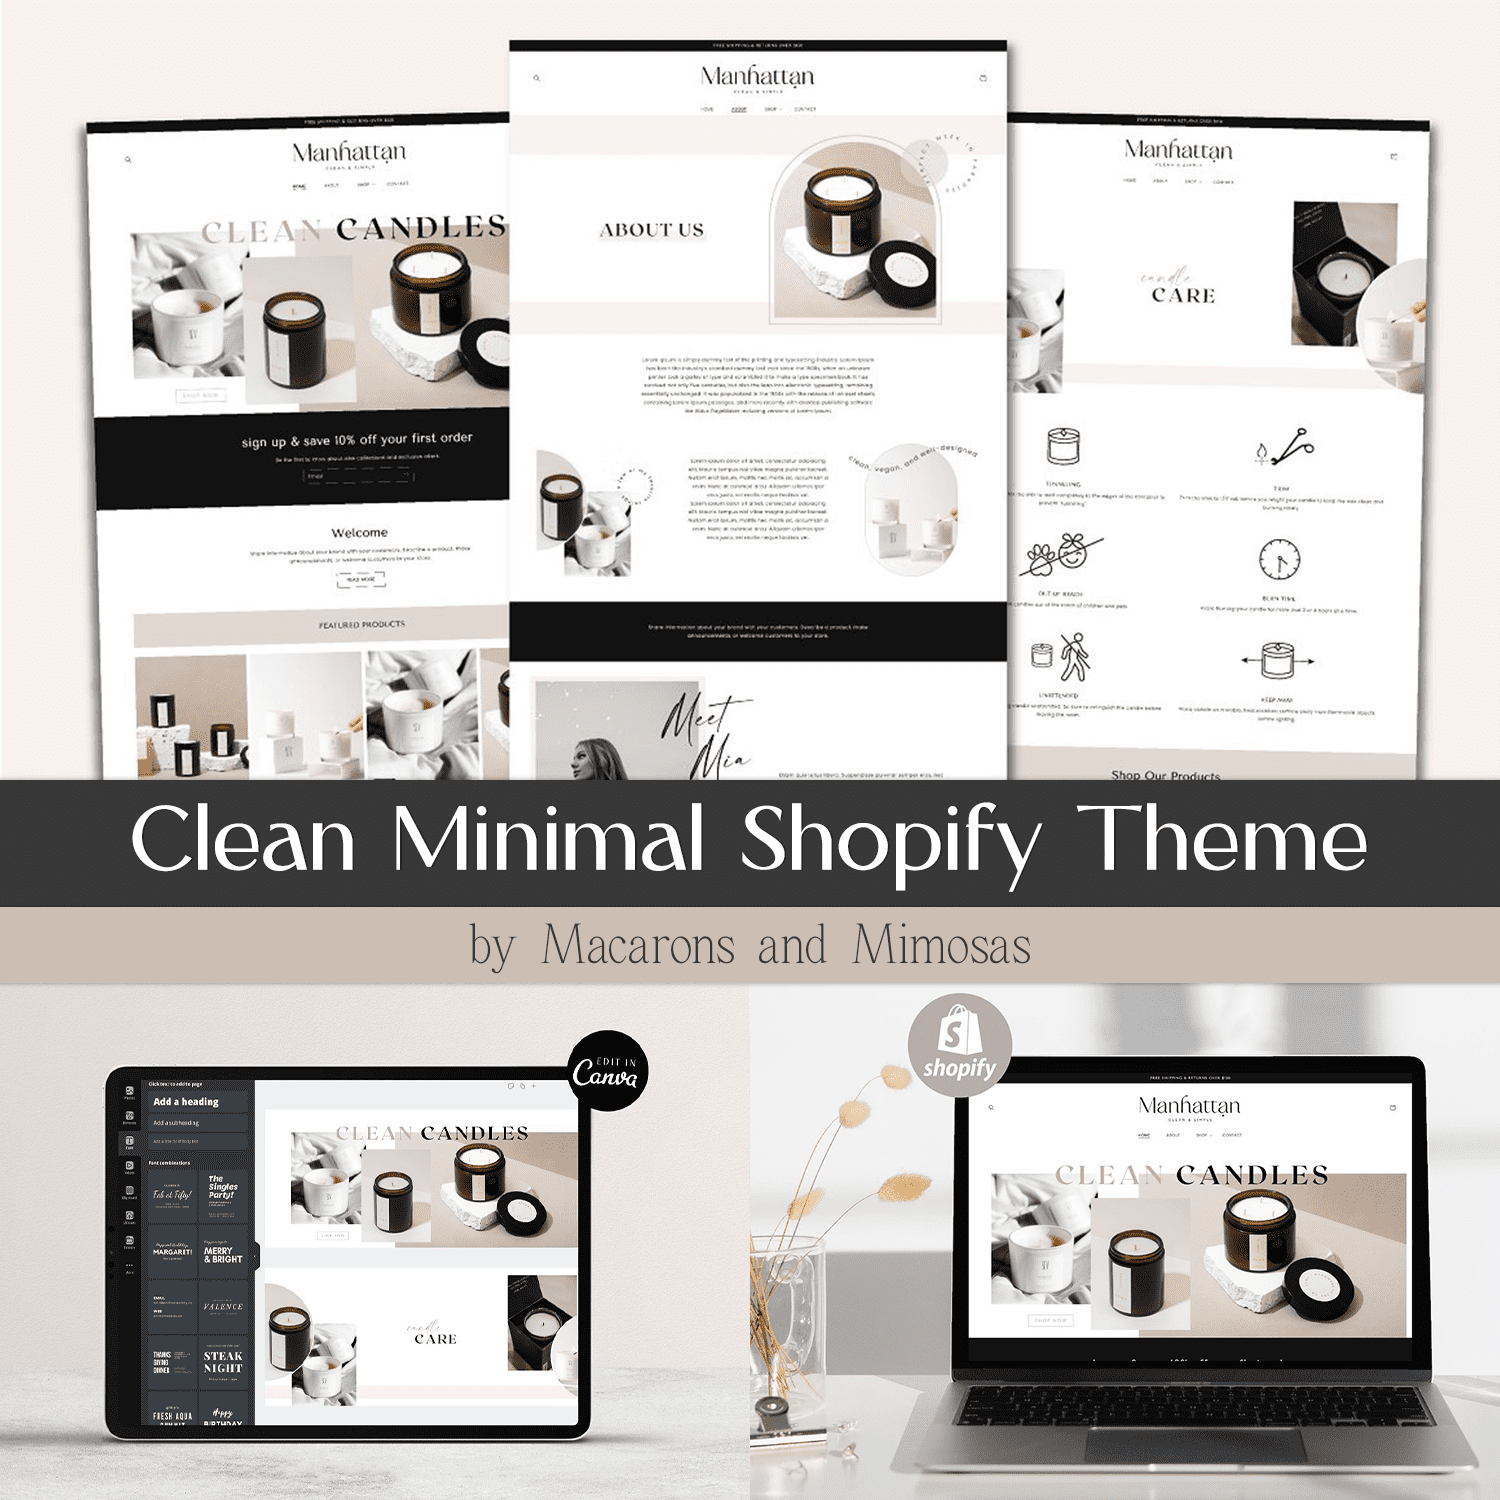 Clean Minimal Shopify Theme cover.